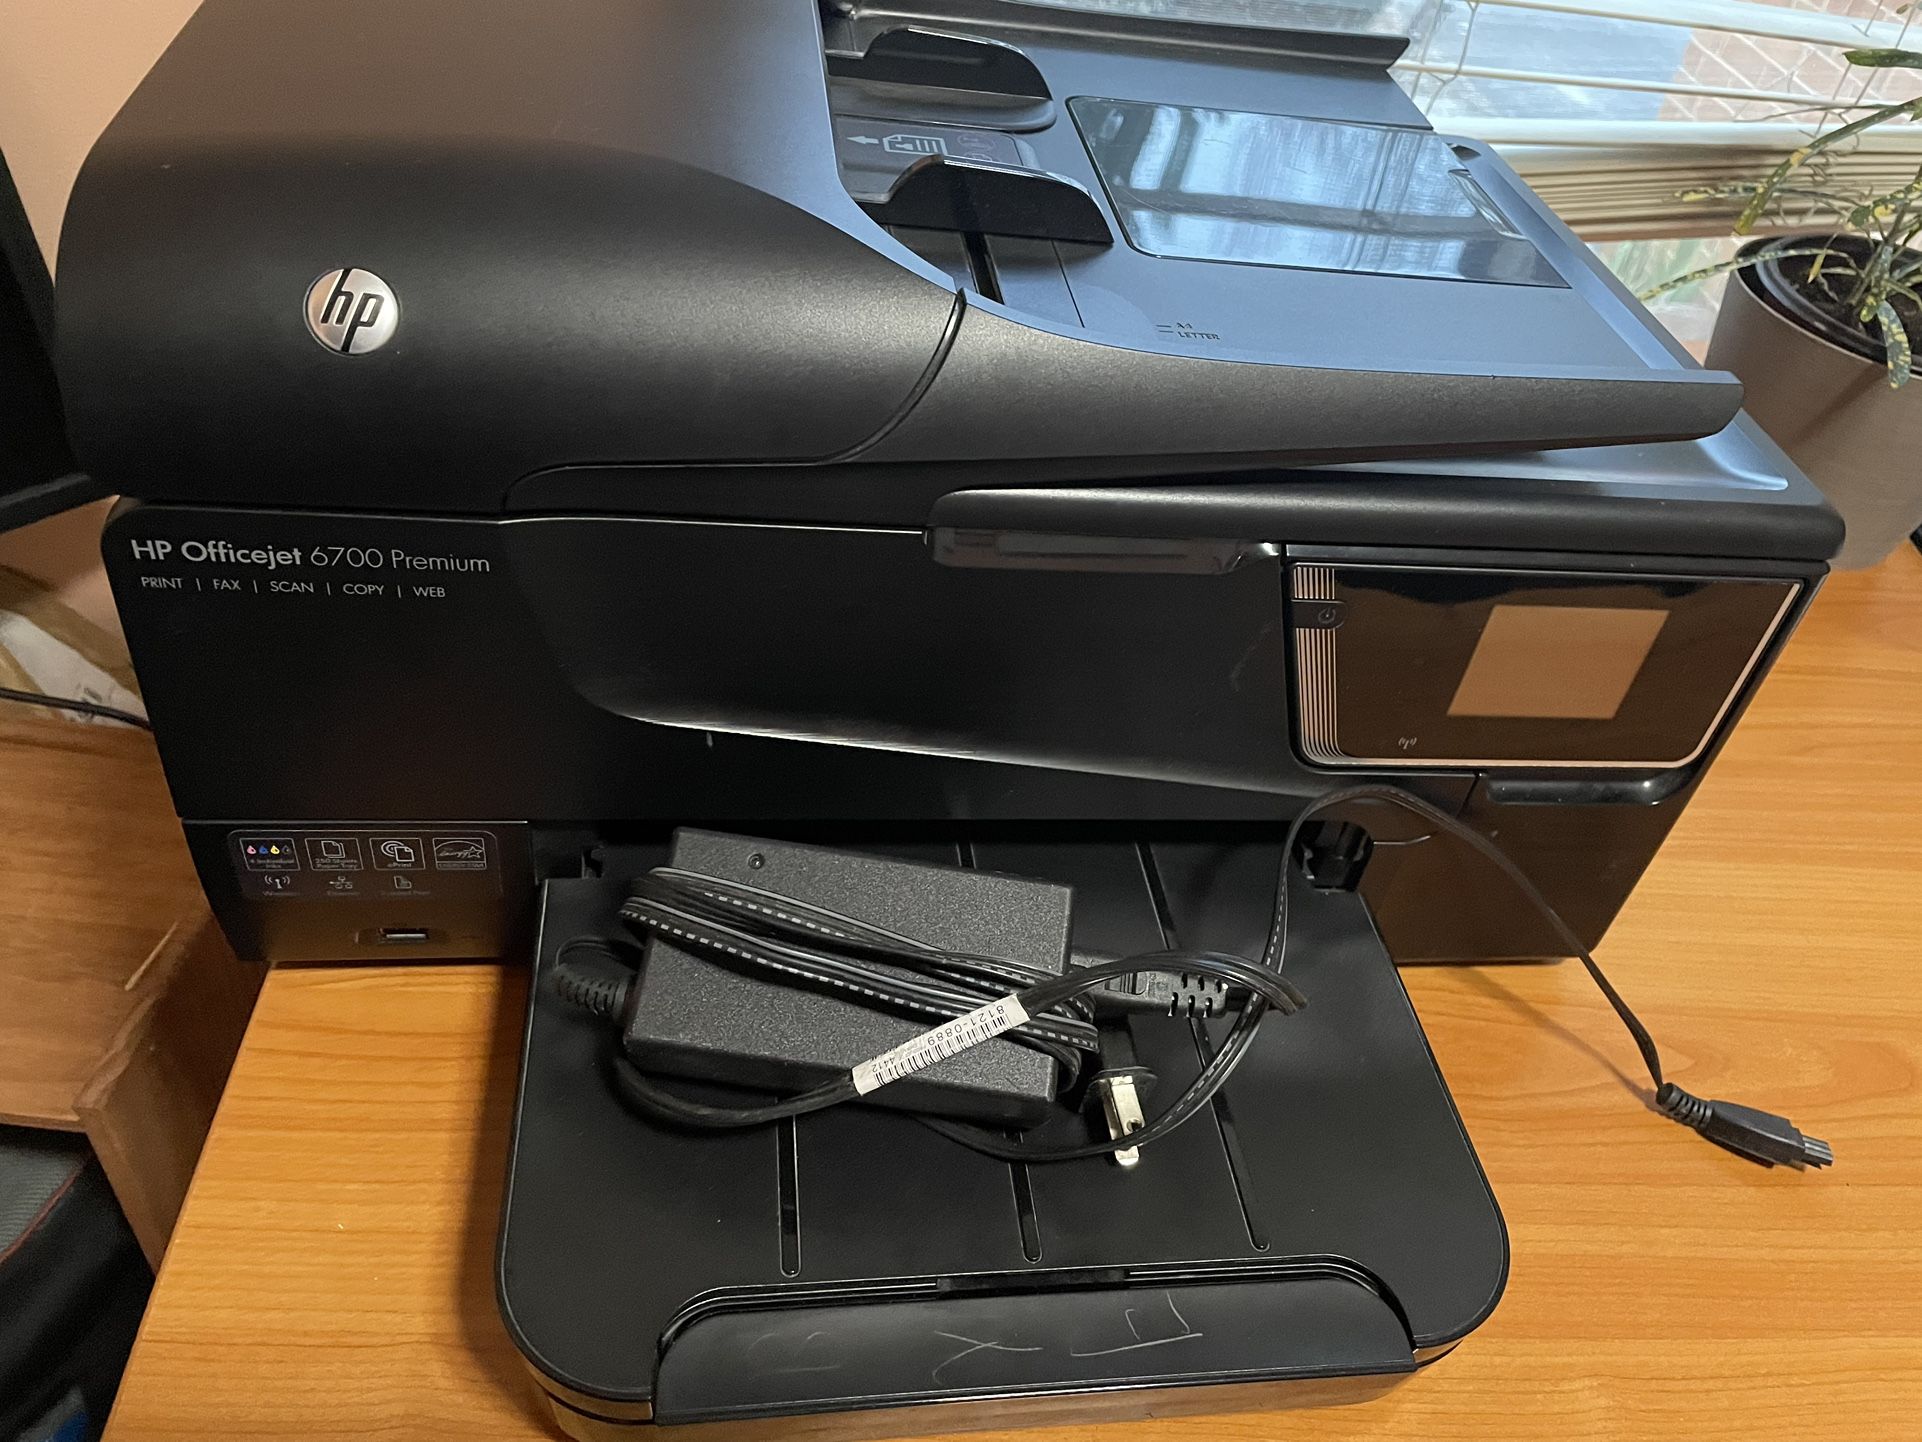 Used Printer For Sale